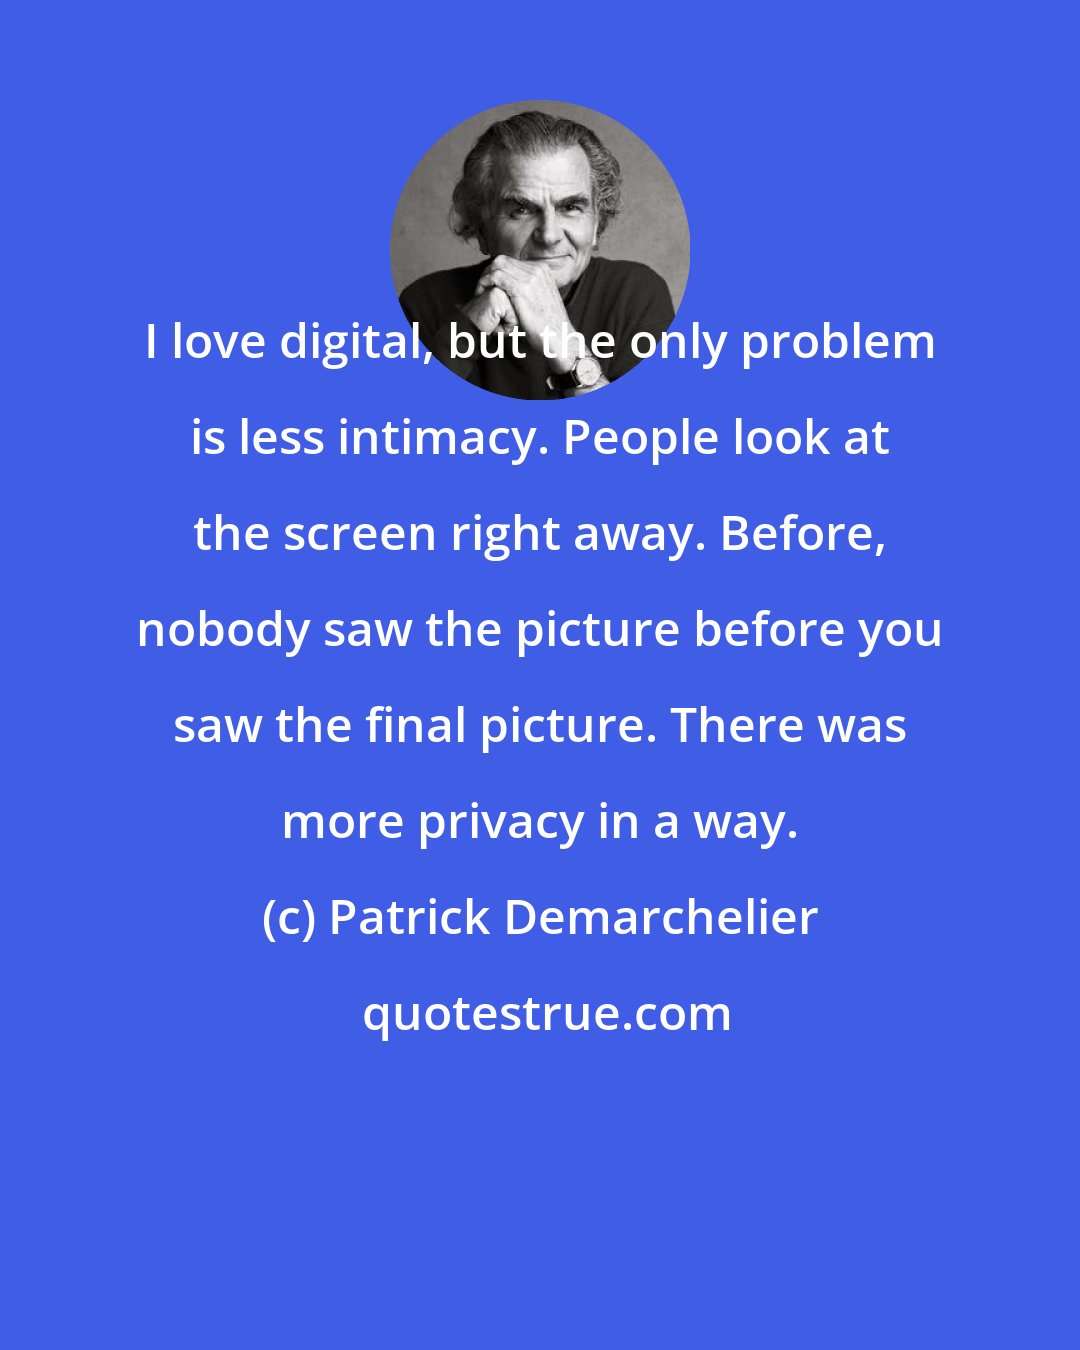 Patrick Demarchelier: I love digital, but the only problem is less intimacy. People look at the screen right away. Before, nobody saw the picture before you saw the final picture. There was more privacy in a way.